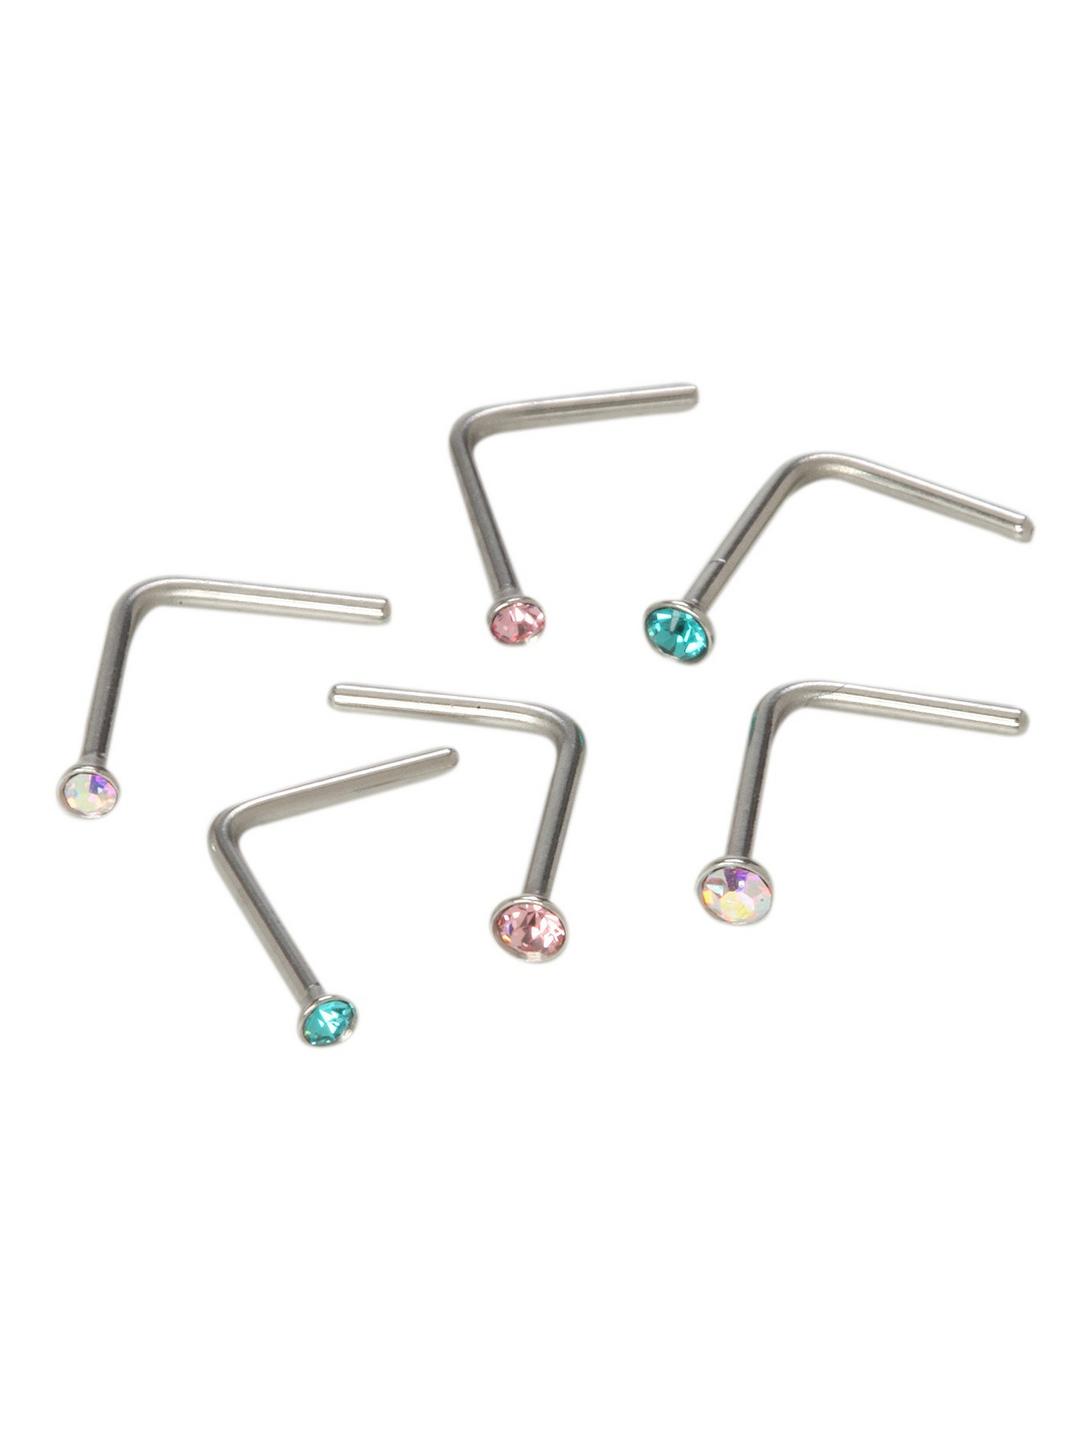 20G Steel Pink Turquoise Iridescent L-Shaped Nose Bone 6 Pack, TURQUOISE, hi-res